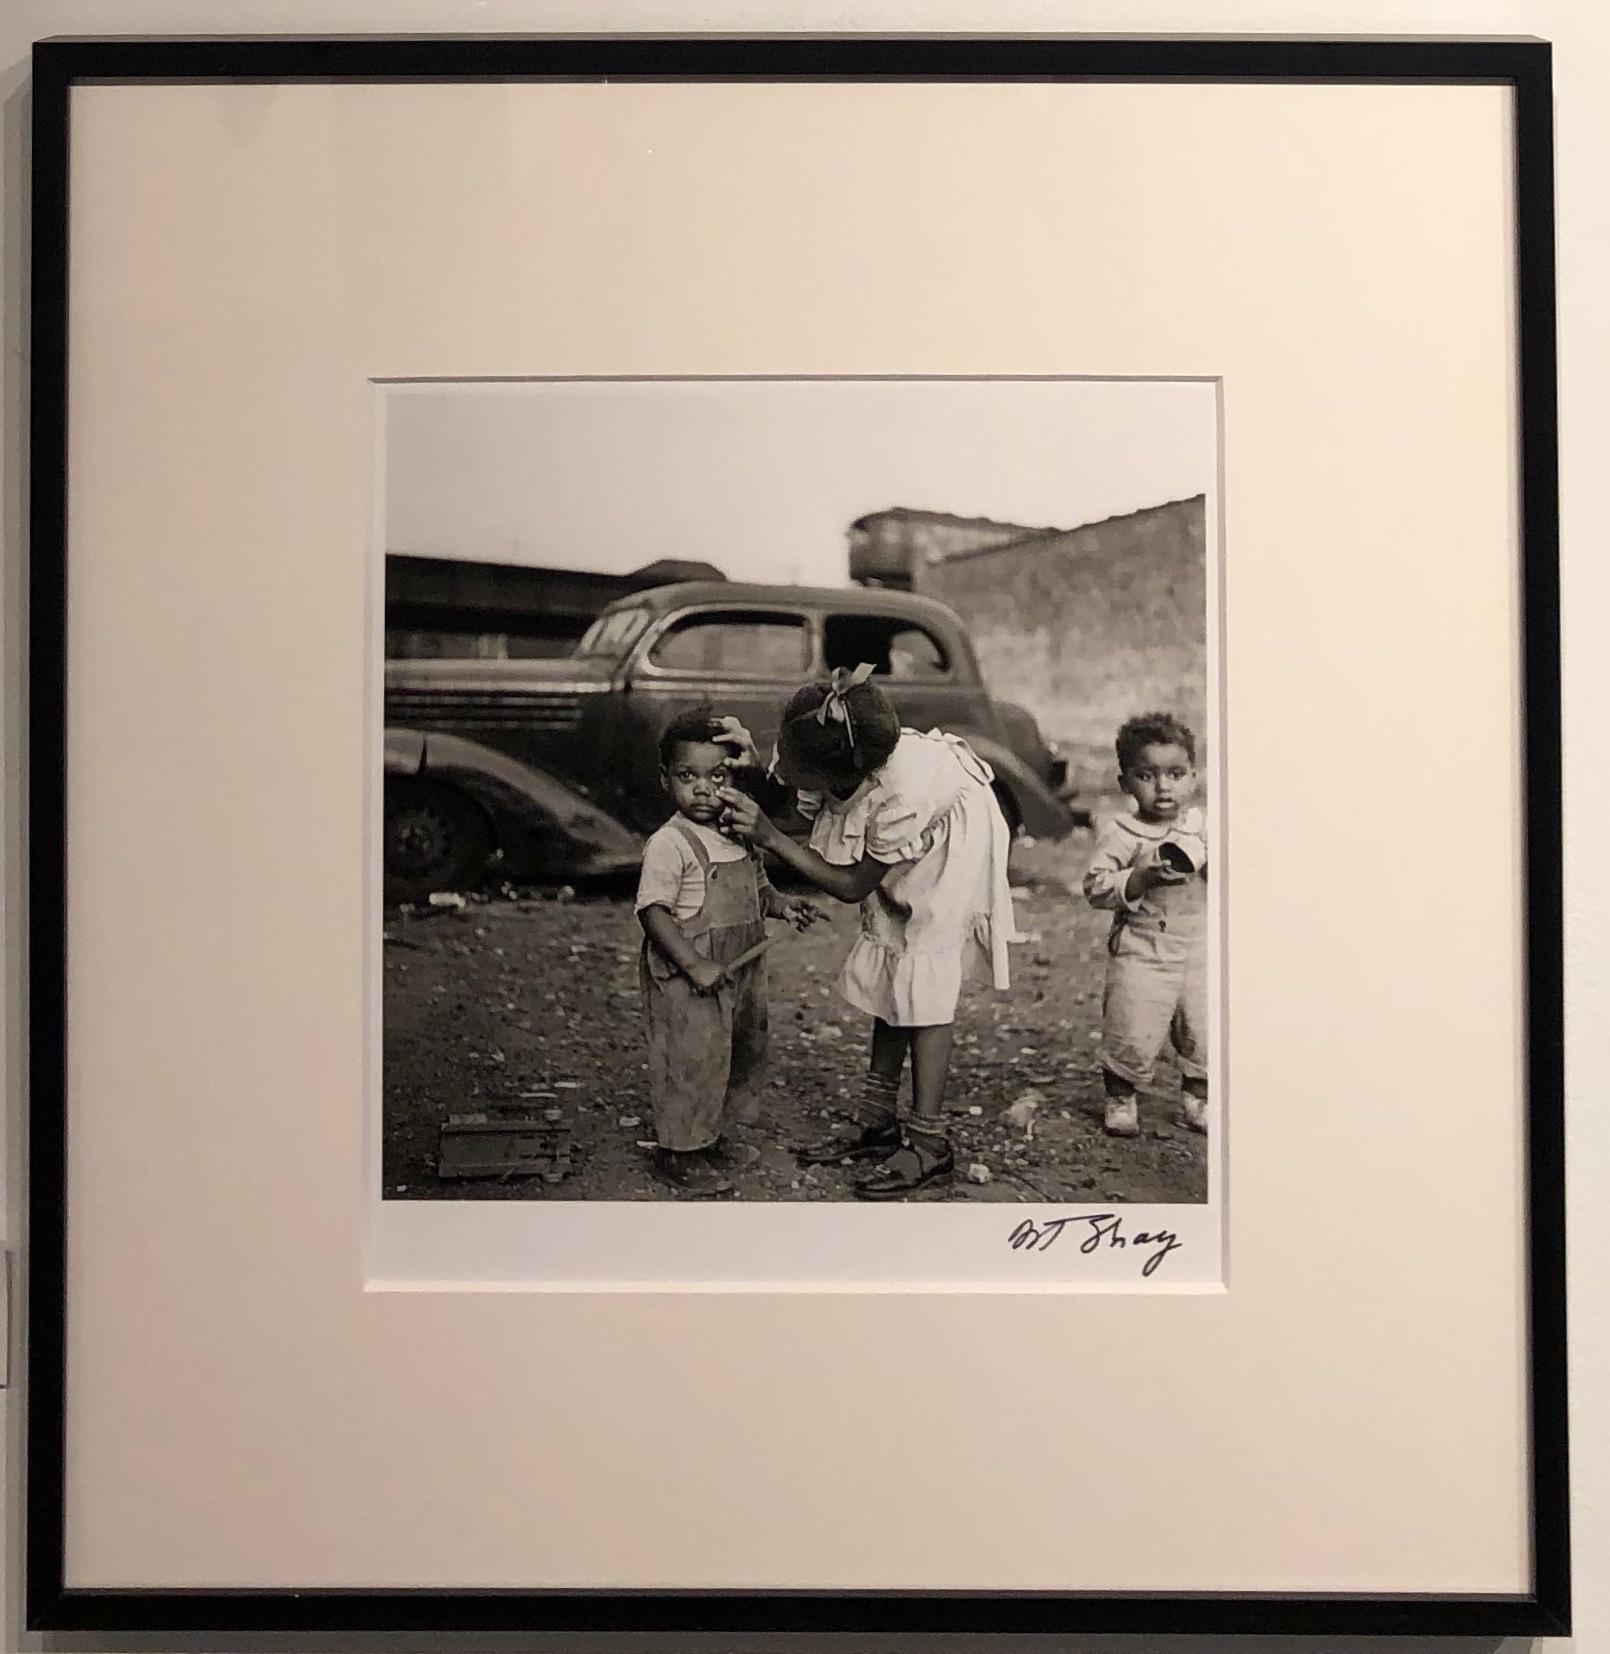 First Aid 1950, Black and White Photograph of Two Small Children, Signed, Framed (Schwarz), Figurative Photograph, von Art Shay